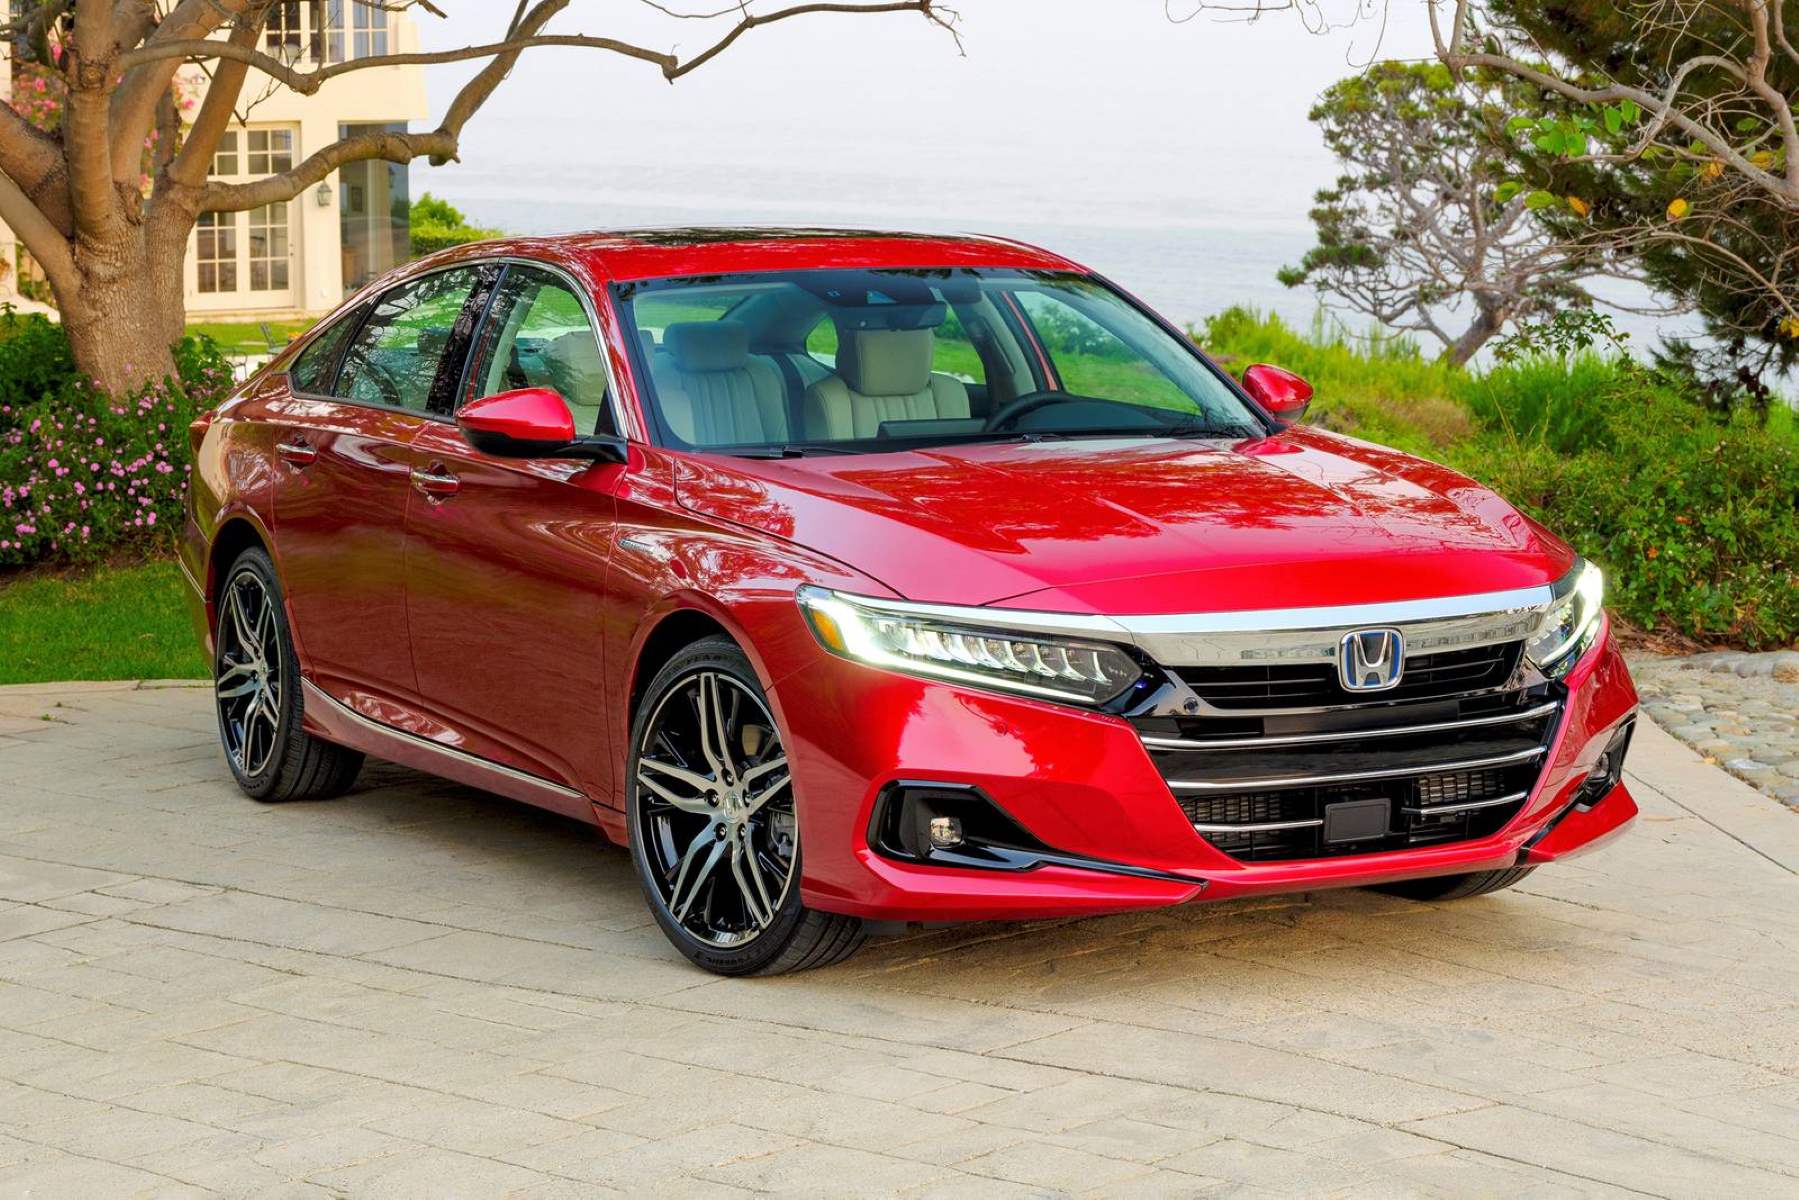 Unveiling The Ultimate Discount: How Much Can You Save On A Used Honda Accord Hybrid From A Dealer?